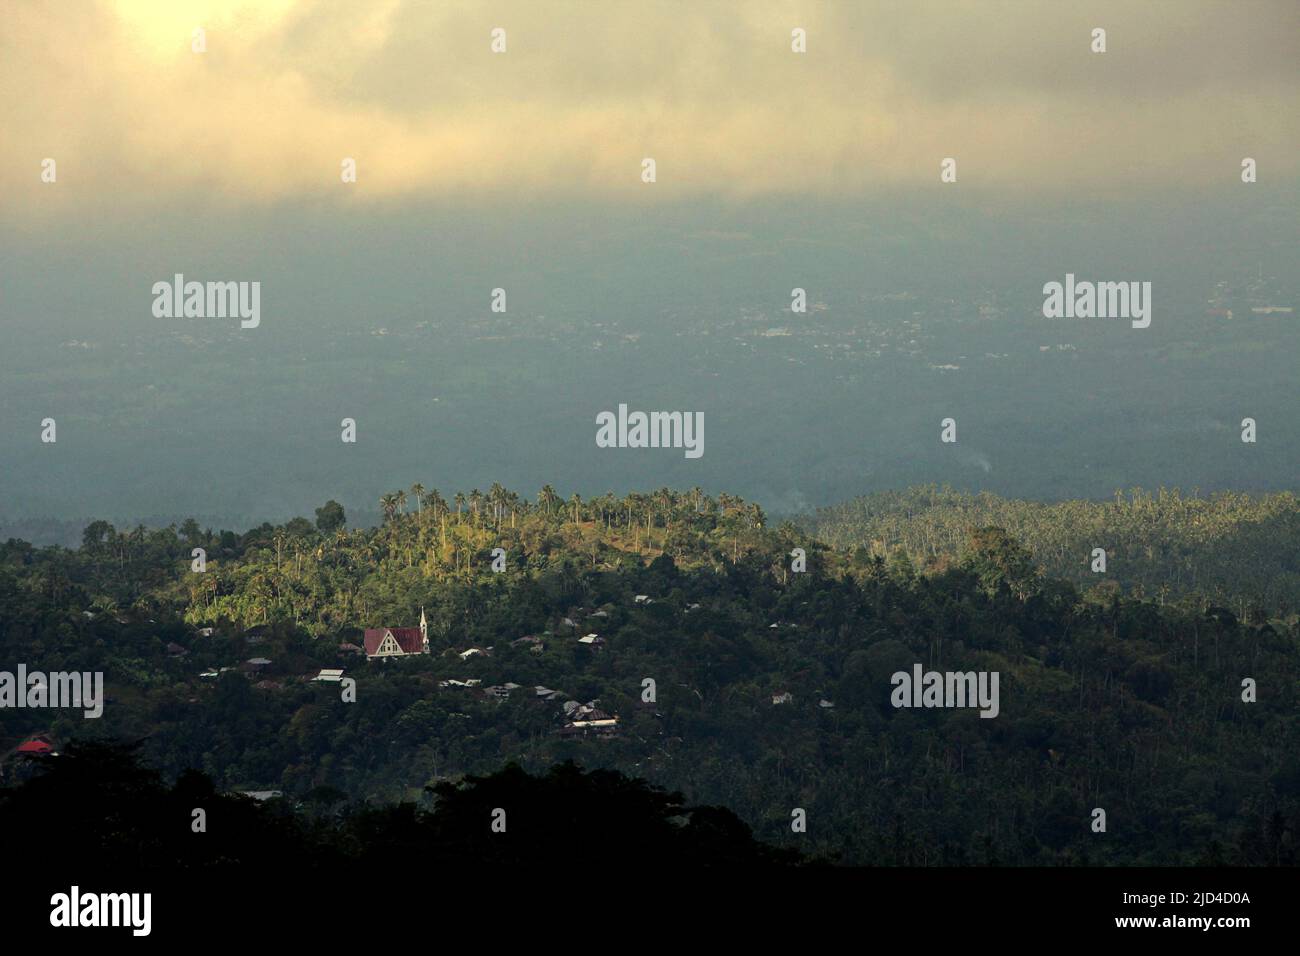 A distant view of the landscape of a village surrounded by forest and agricultural plantations in Minahasa, North Sulawesi, Indonesia. Stock Photo